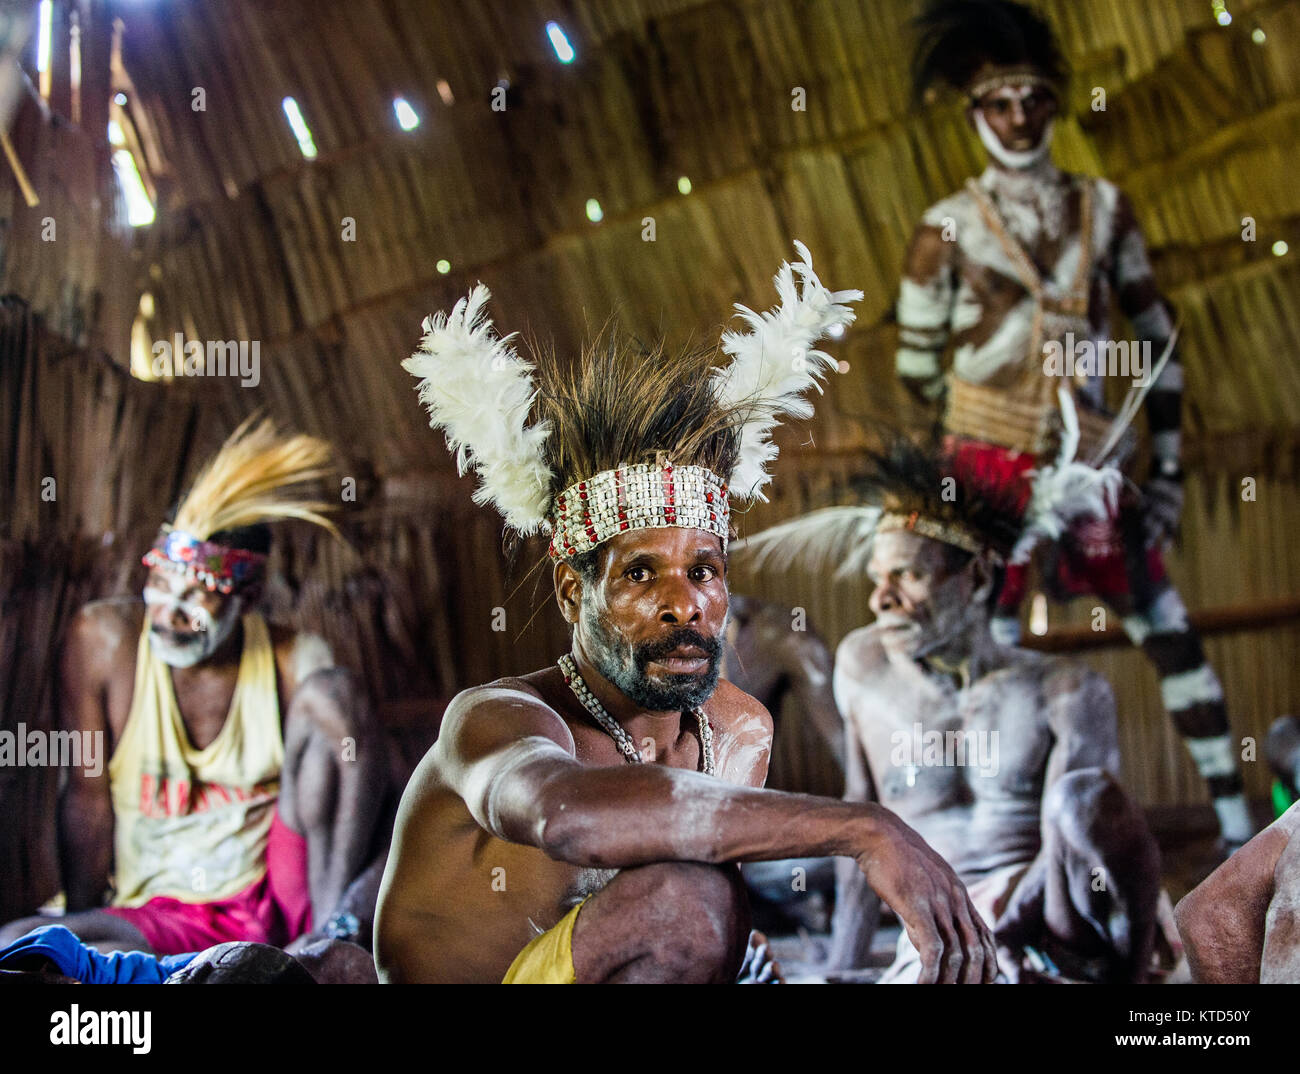 YOUW VILLAGE, ATSY DISTRICT, ASMAT REGION, IRIAN JAYA, NEW GUINEA, INDONESIA - MAY 23, 2016: Portrait of a man from the tribe of Asmat people with rit Stock Photo